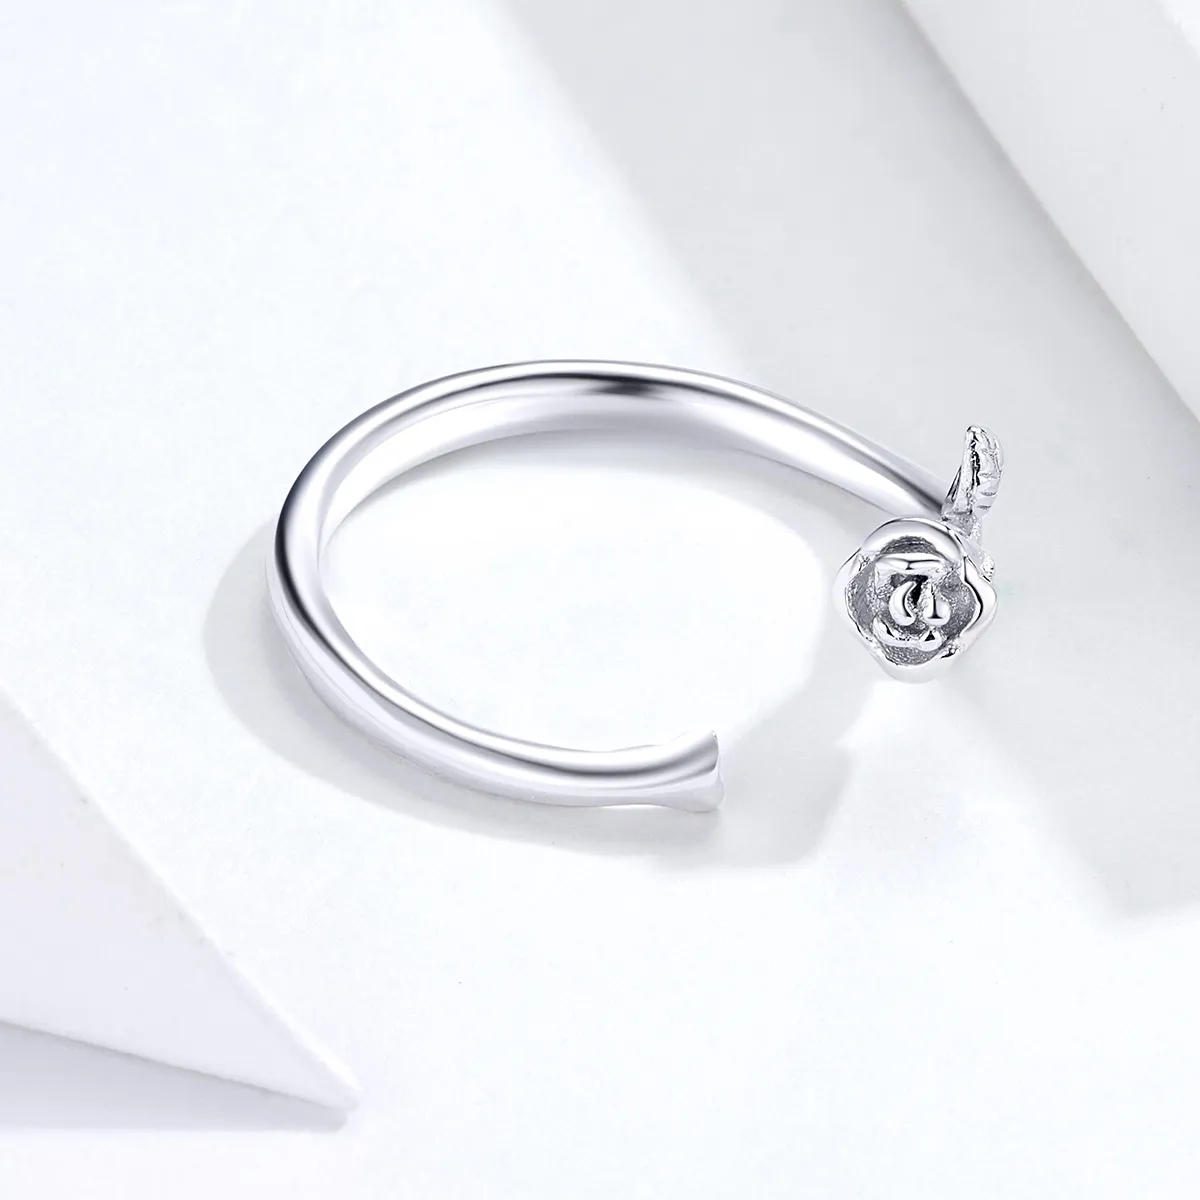 Pandora Style Silver Rose Flower Open Ring - BSR065